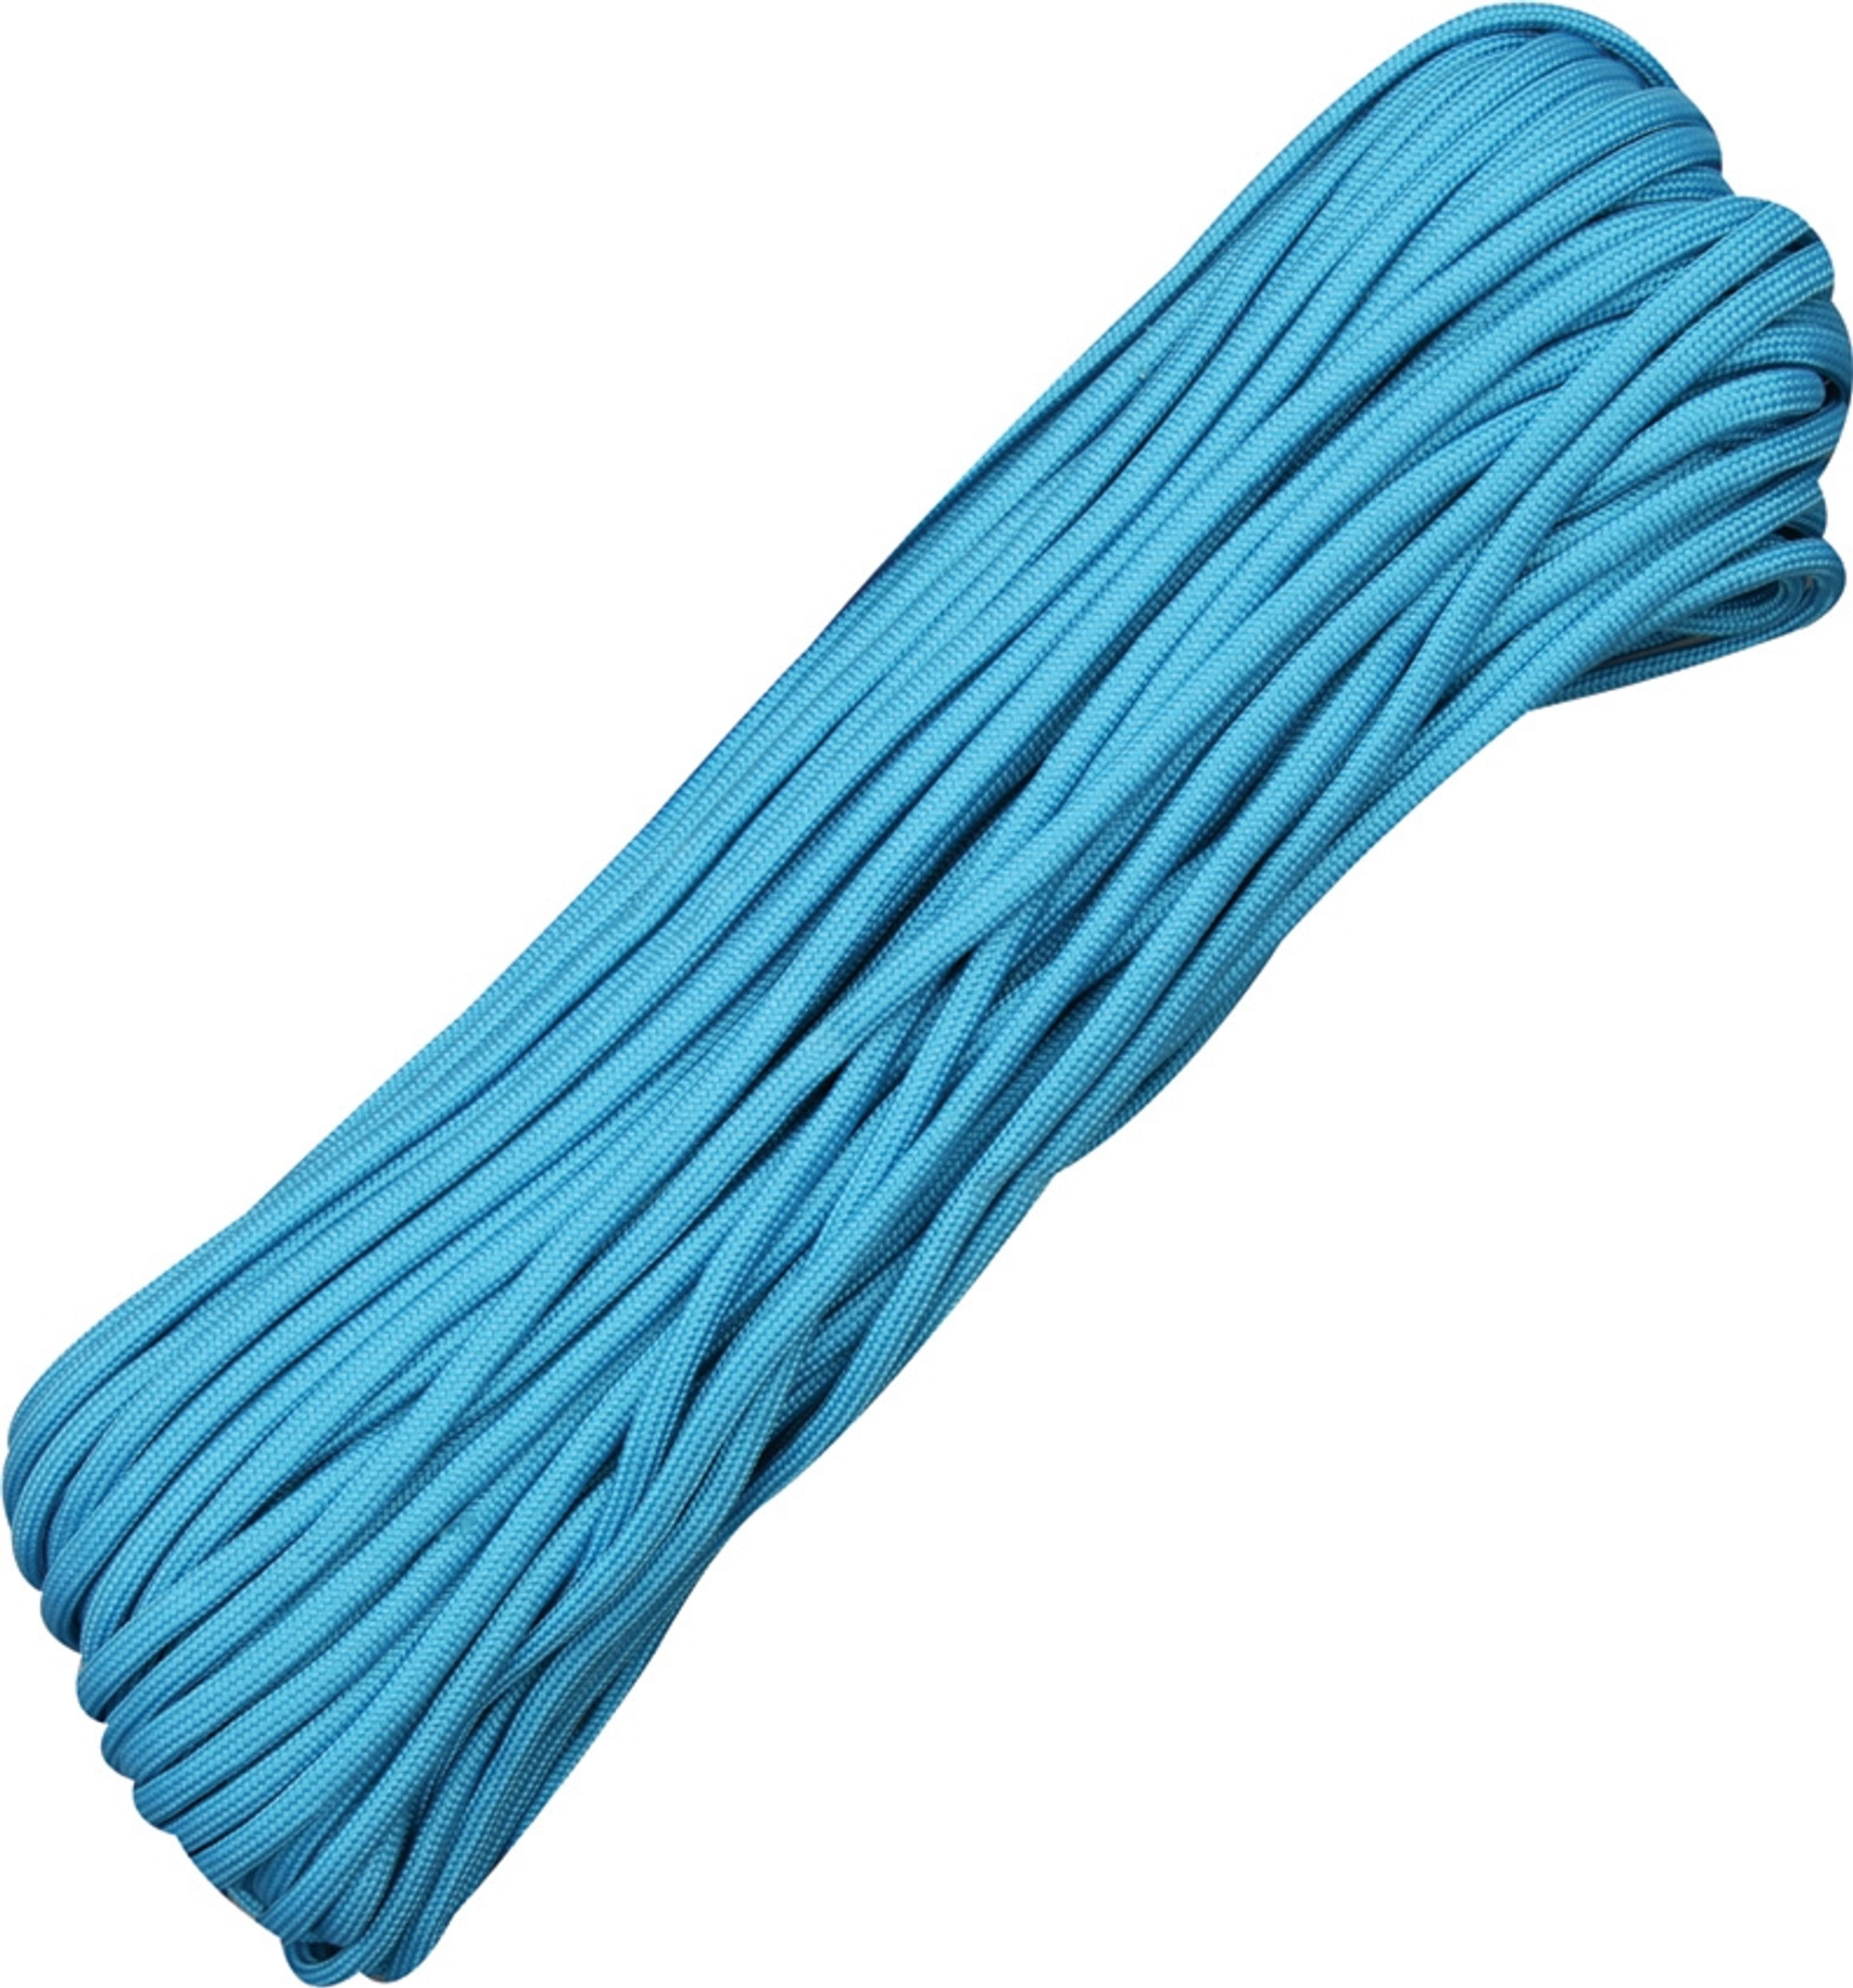 Parachute Cord Neon Turquoise RG1027H